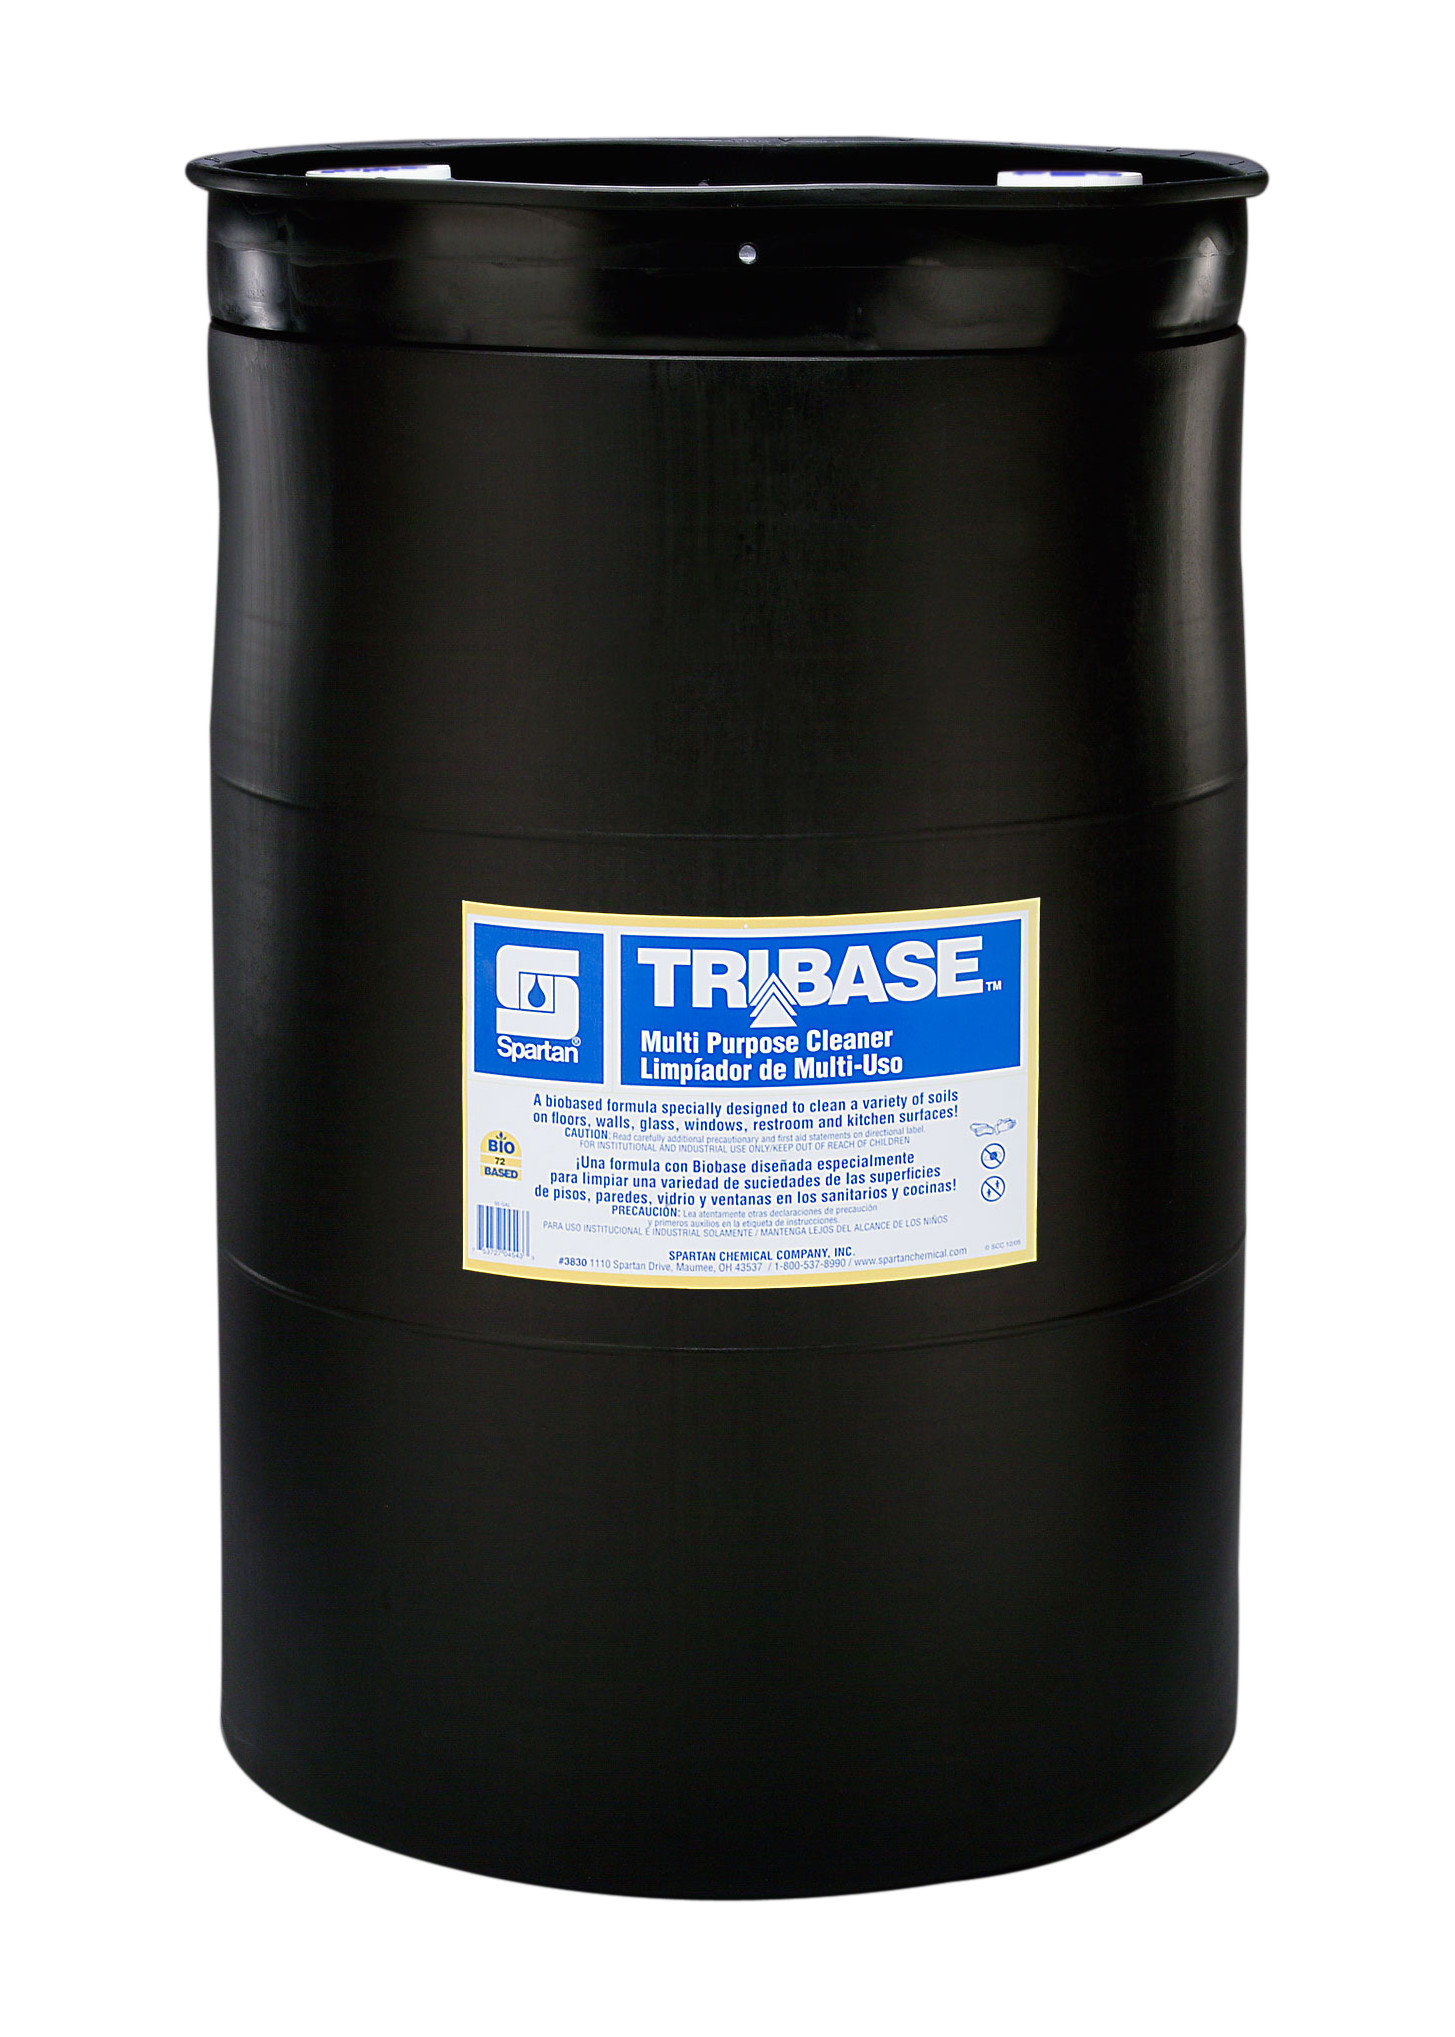 Spartan Chemical Company TriBase Multi Purpose Cleaner, 55 GAL DRUM